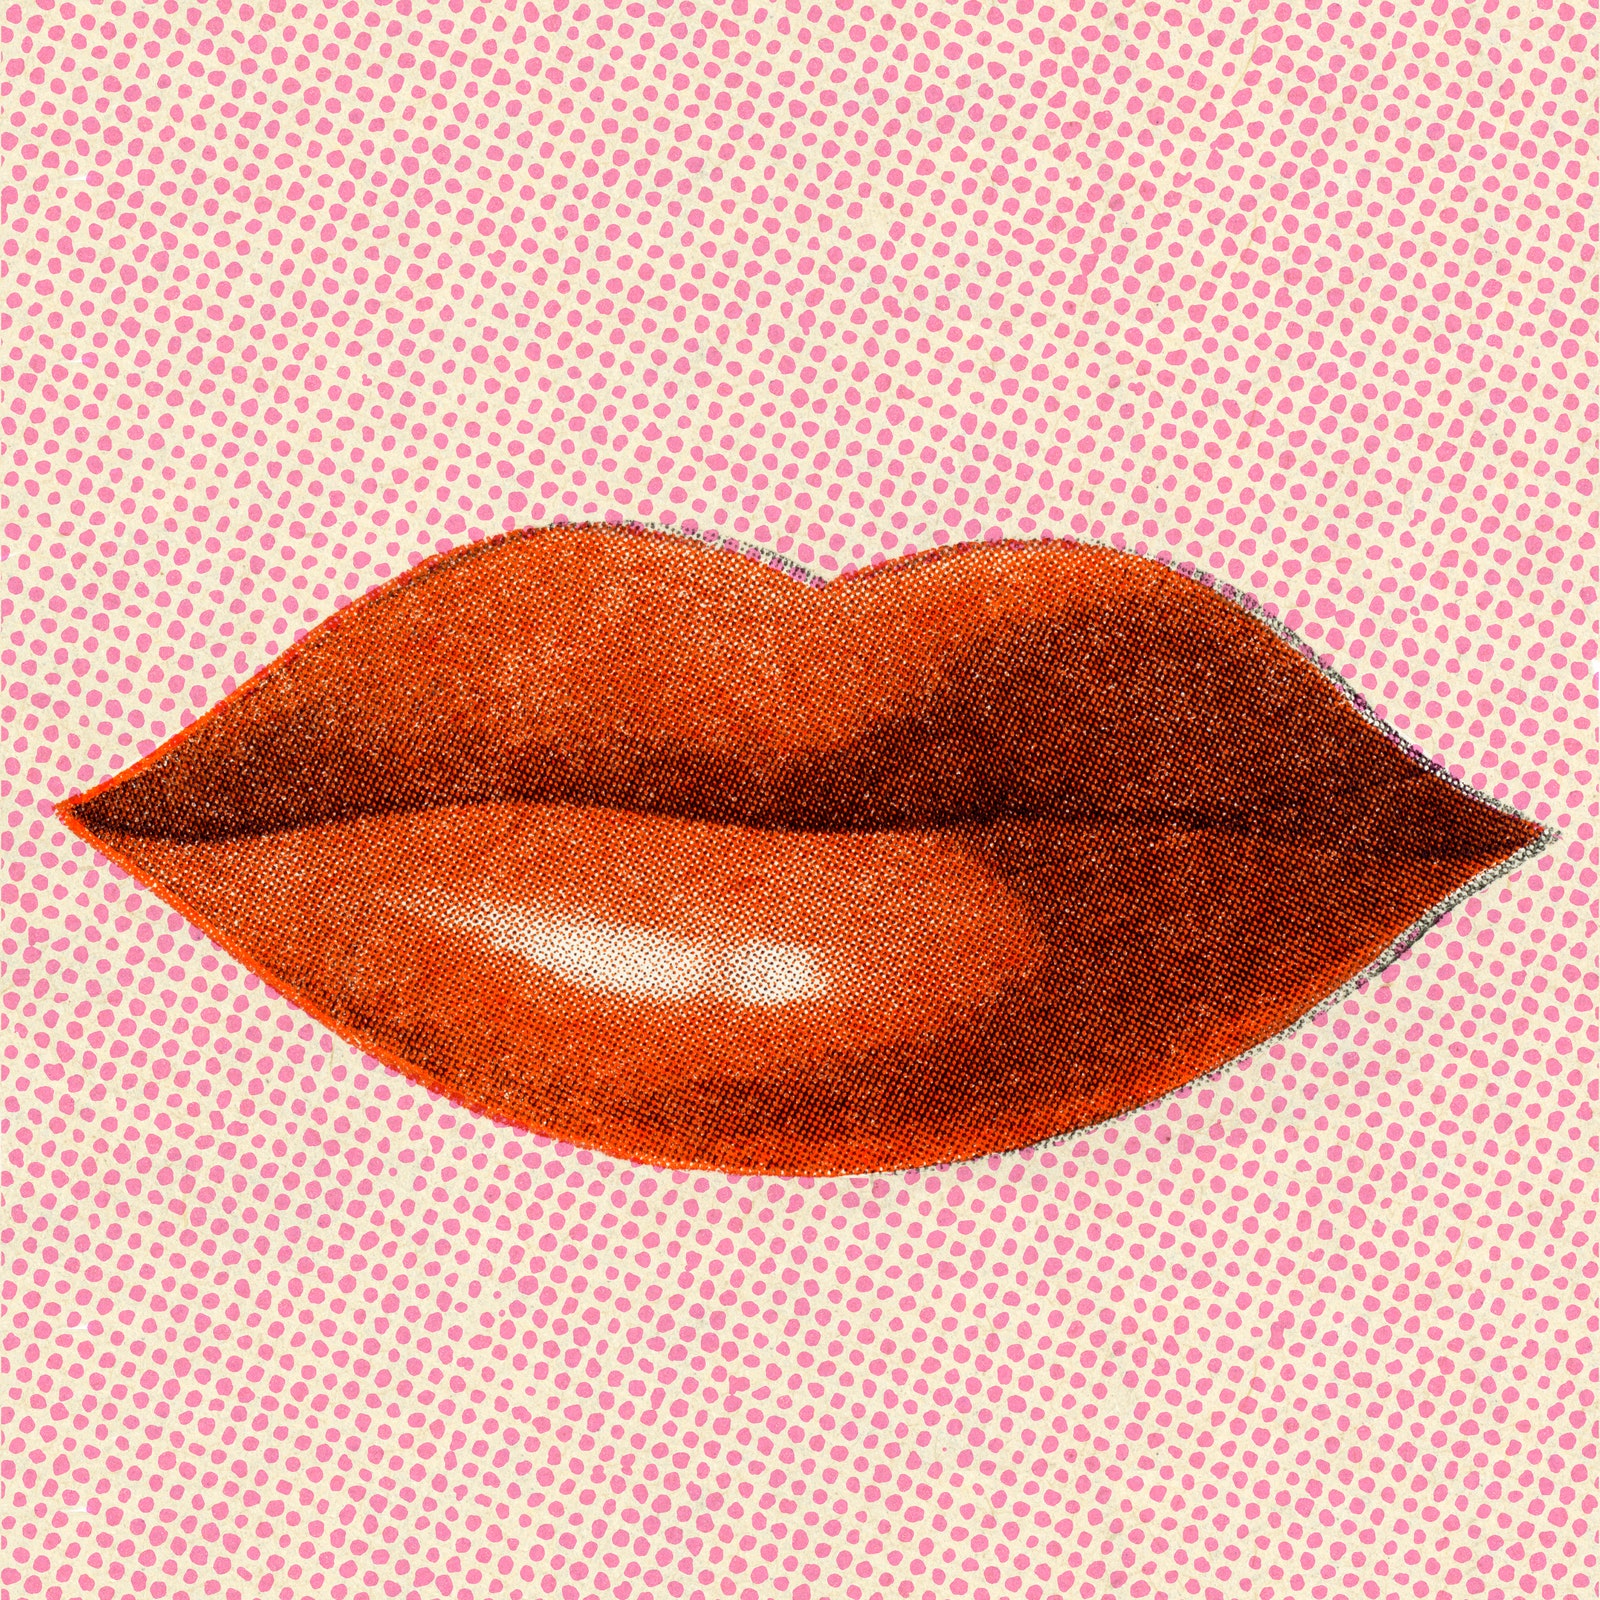 What to Do If You Hate Your Lip Filler and Are Kind of Freaking Out